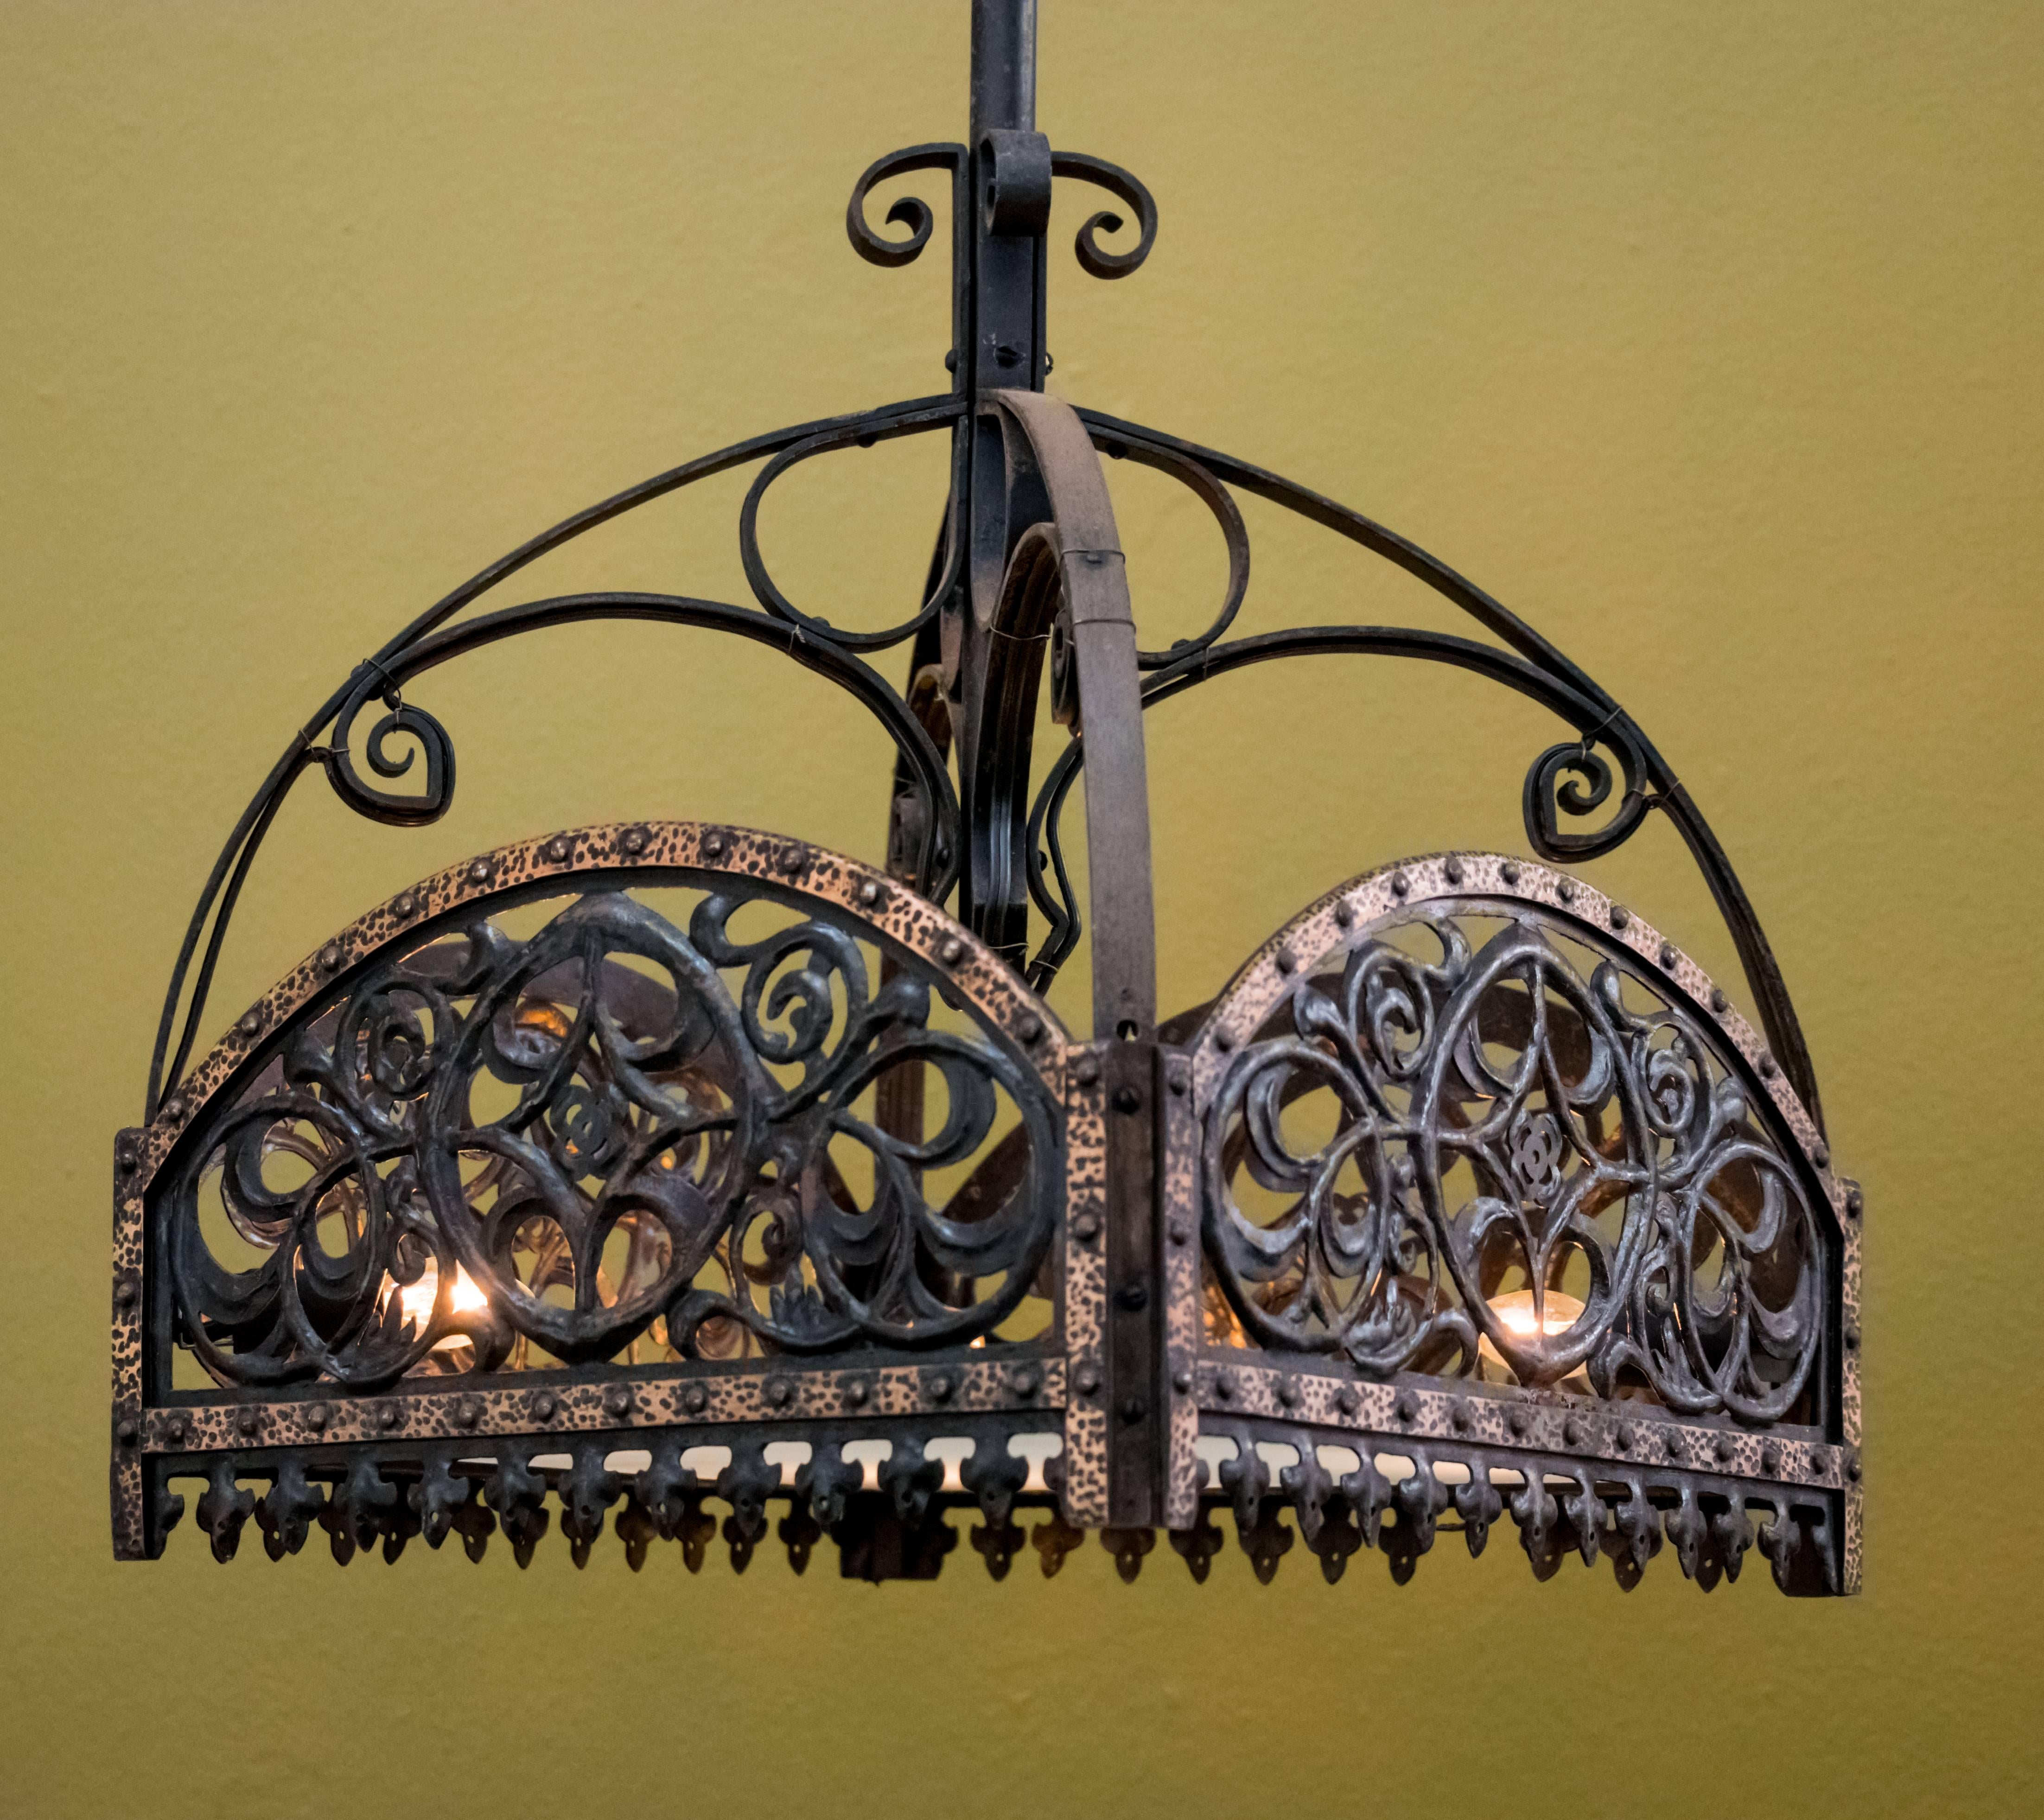 Arts and Crafts / Art Nouveau style light with four internal candelabra sockets. Decorative iron design with hammered copper banding around the top and frosted art glass diffuser at the base. All original parts, excluding the new art glass diffuser